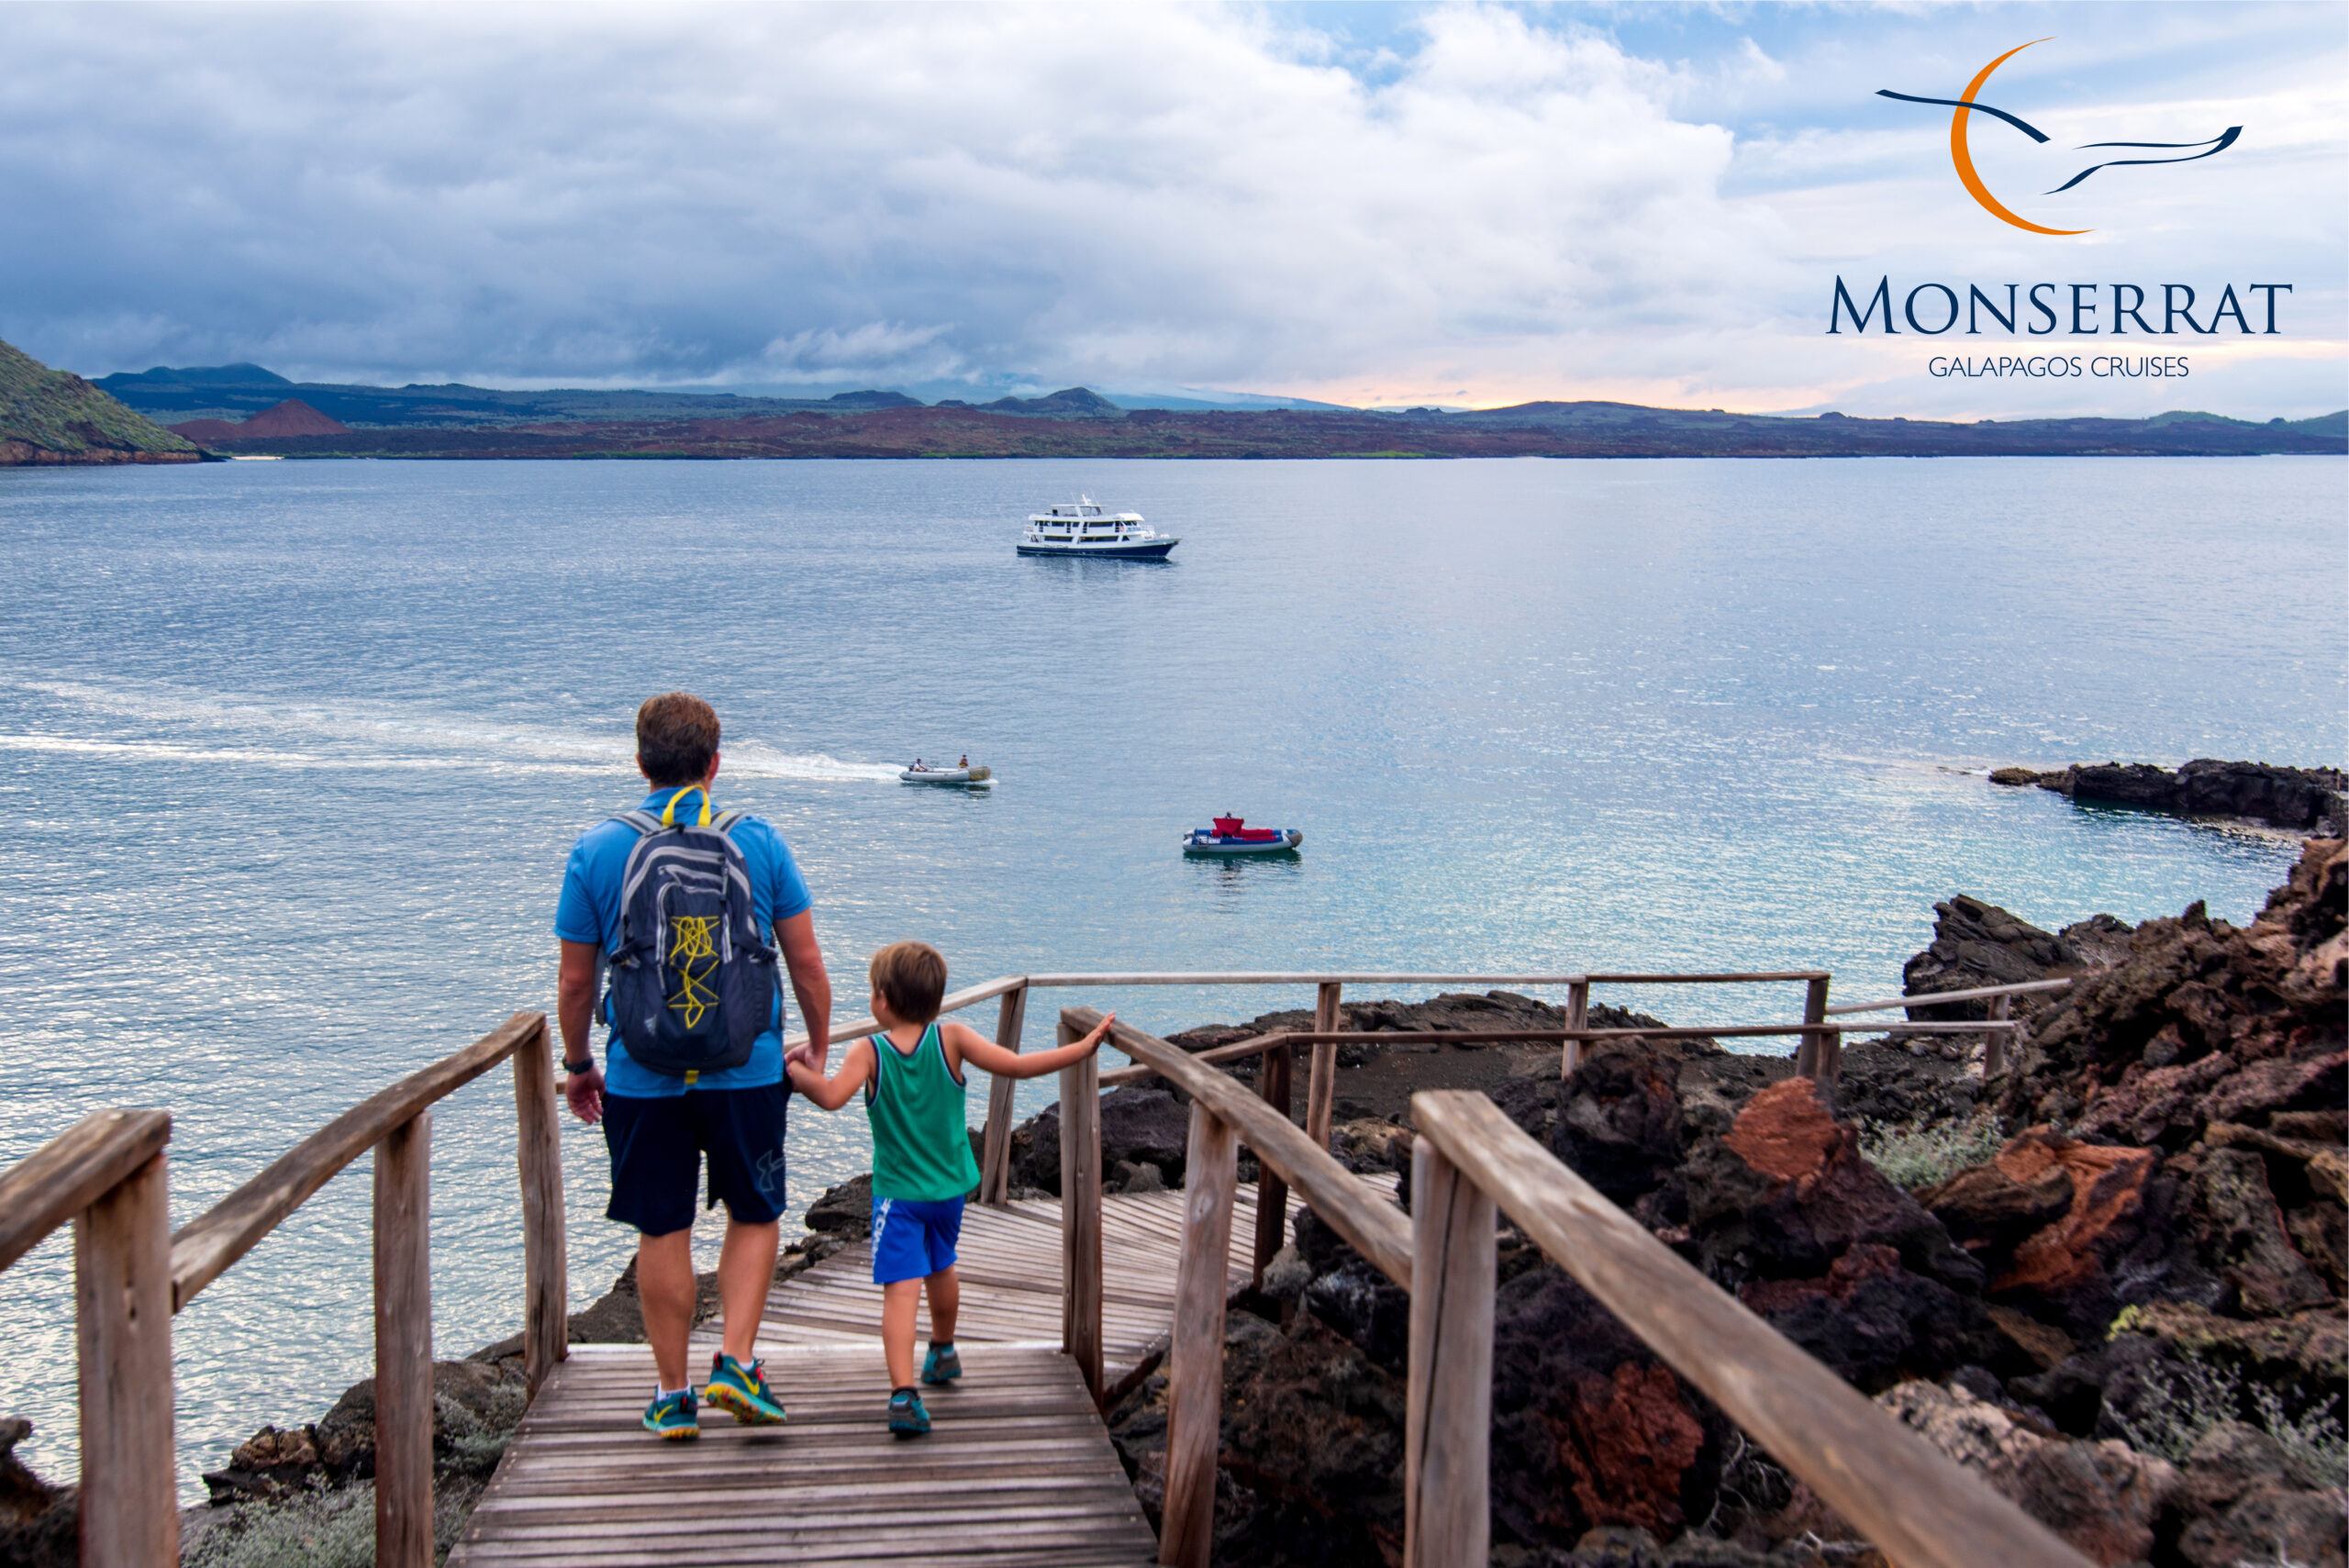 Monserrat Galapagos Cruises Guest Experience Families 8 High Res scaled